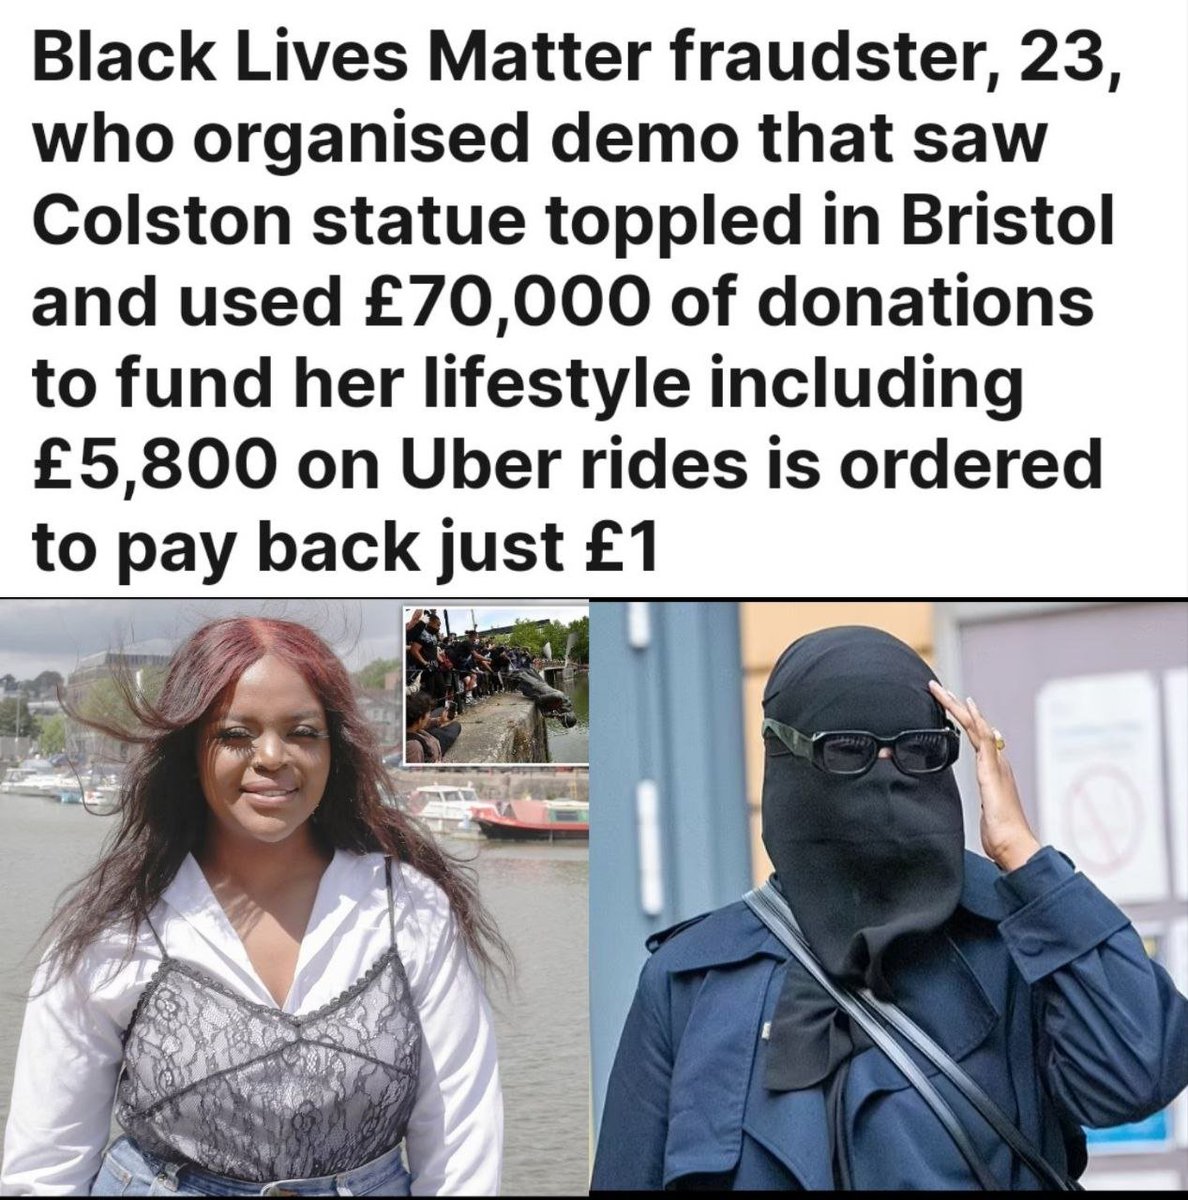 A woman who stole money from online fundraisers, set up after the toppling of Edward Colston's statue in Bristol four years ago, took around £70,000 in total, police say. Now 'penniless', a court has ordered Xahra Saleem to pay back a nominal amount of £1. Police have obtained a…